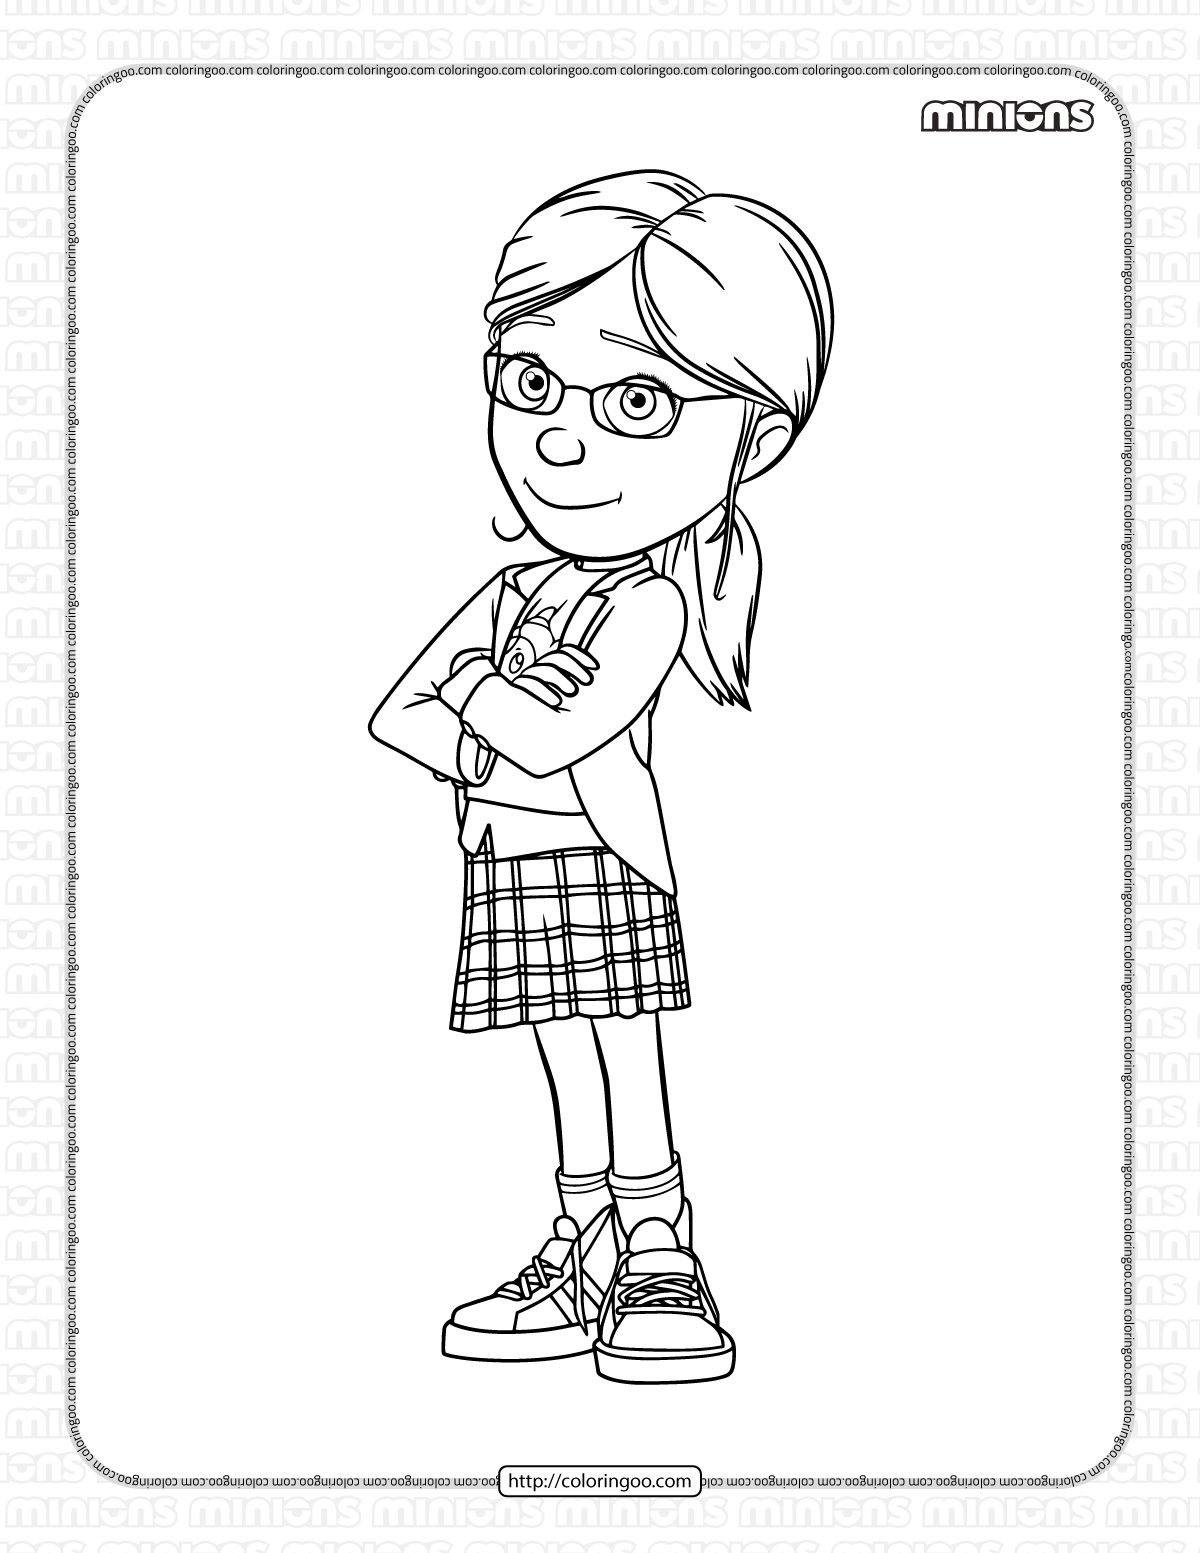 Minions Margo Gru Coloring Page